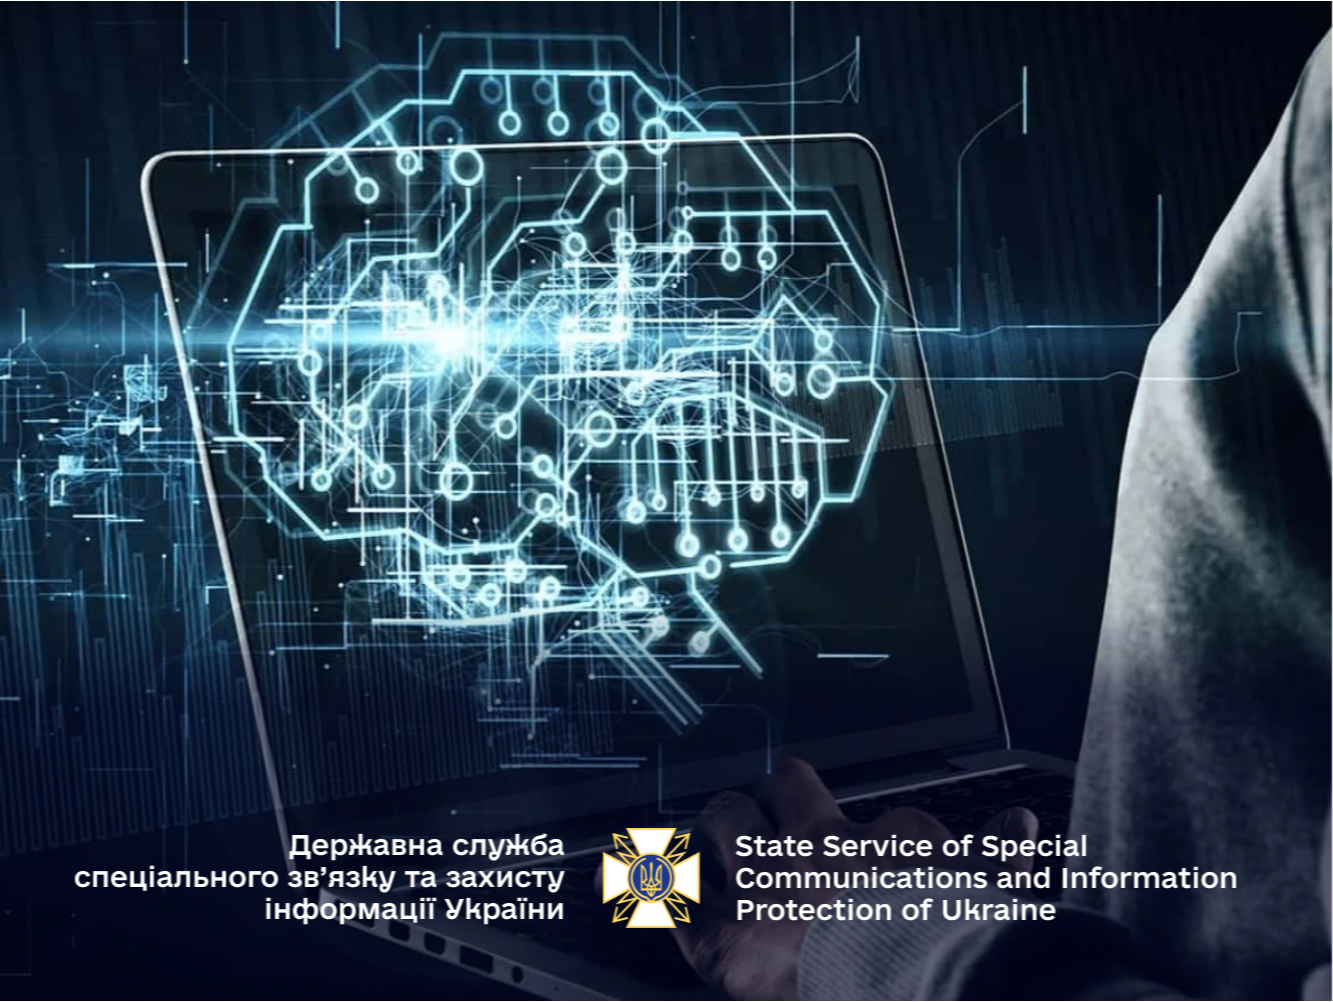 The Cybersecurity Month has begun in Ukraine - Qualification Center